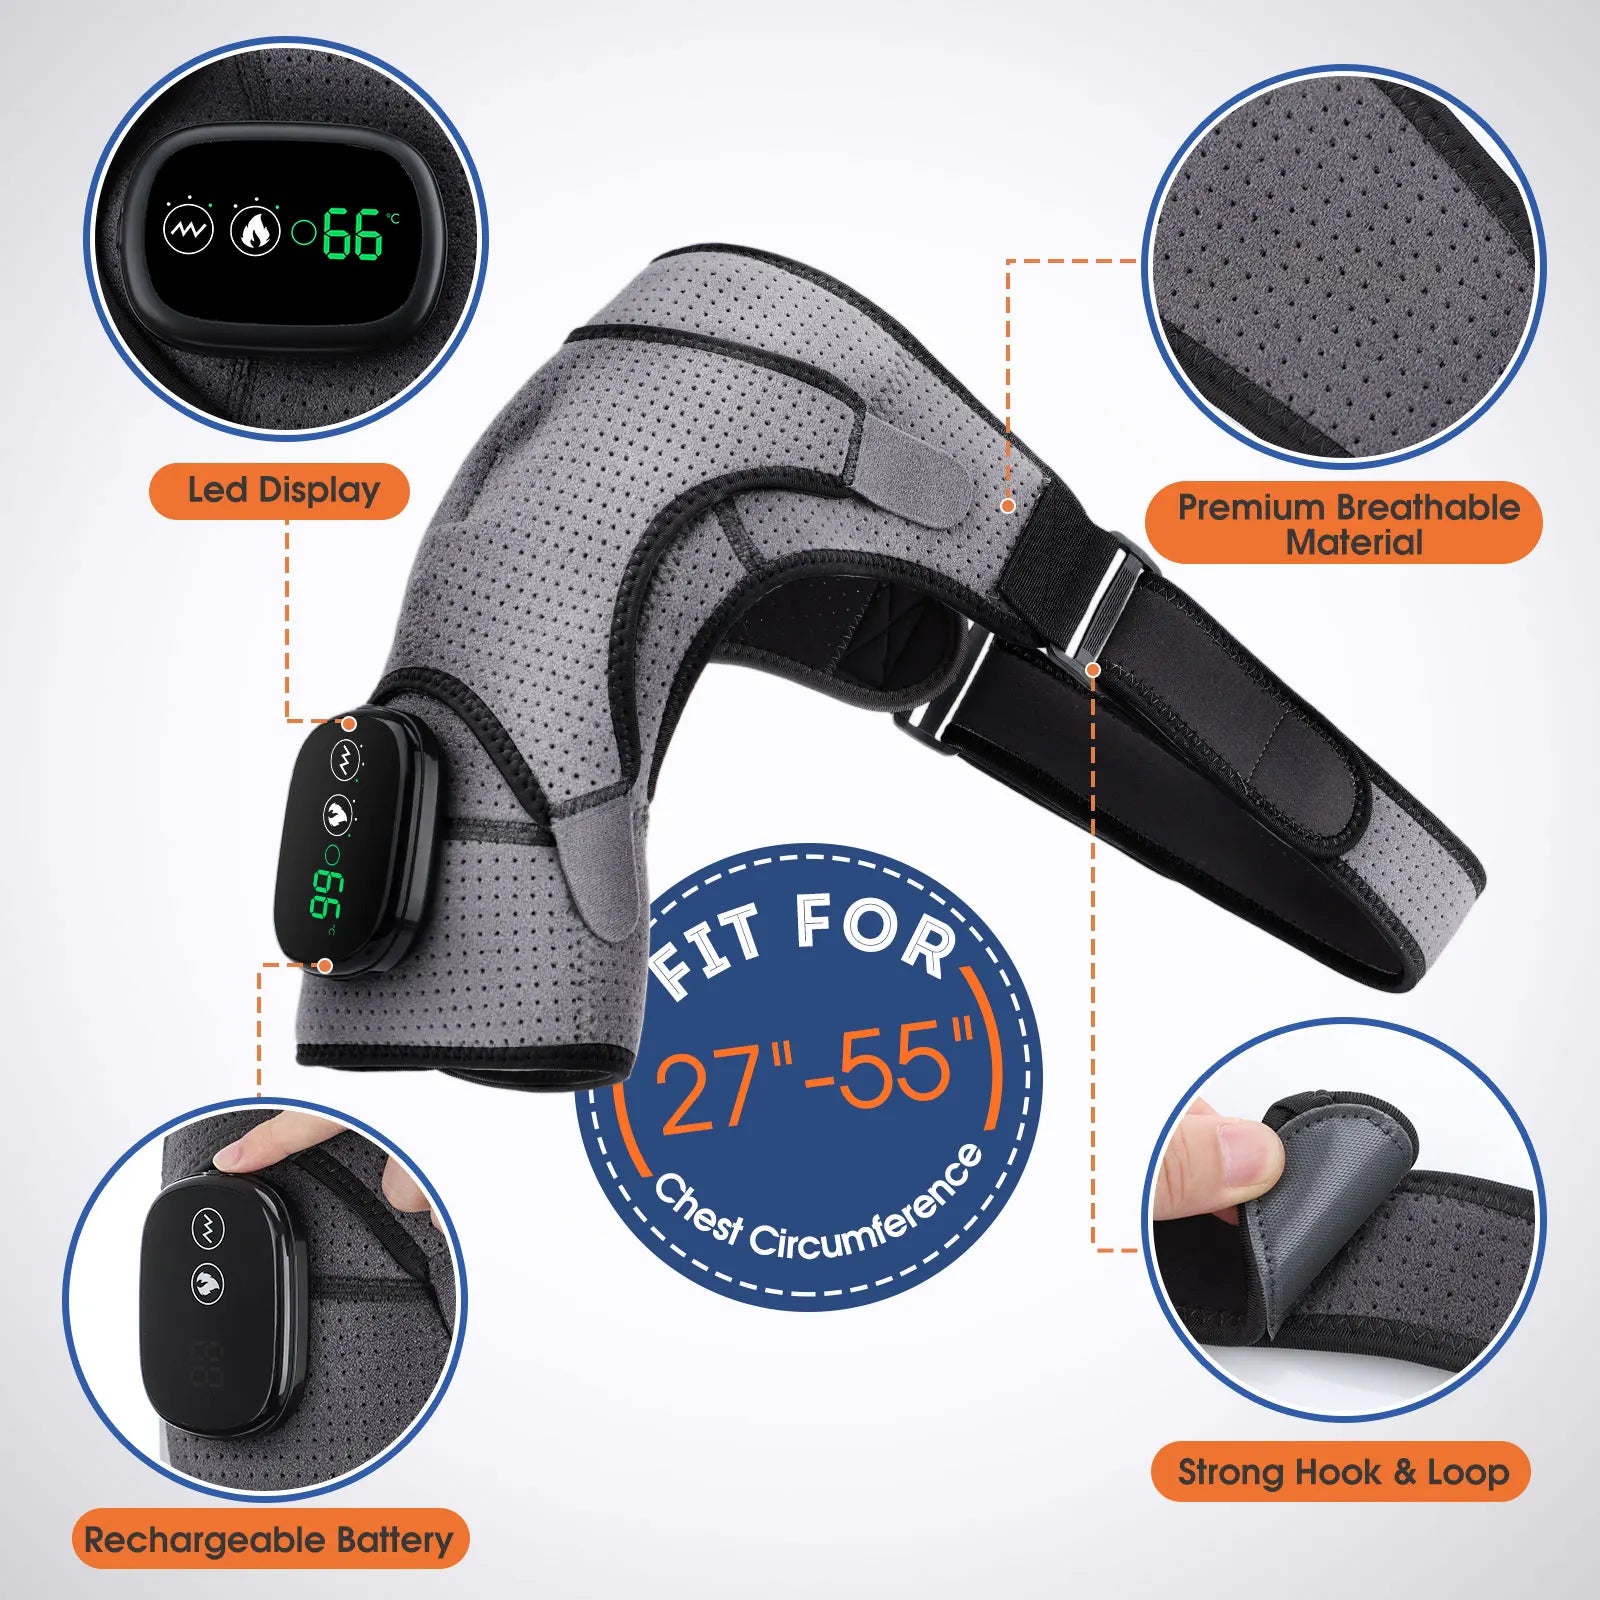 Heating Vibrations Shoulder Neck Back Massage Brace 3 Levels Physiotherapy Therapy - Supersell